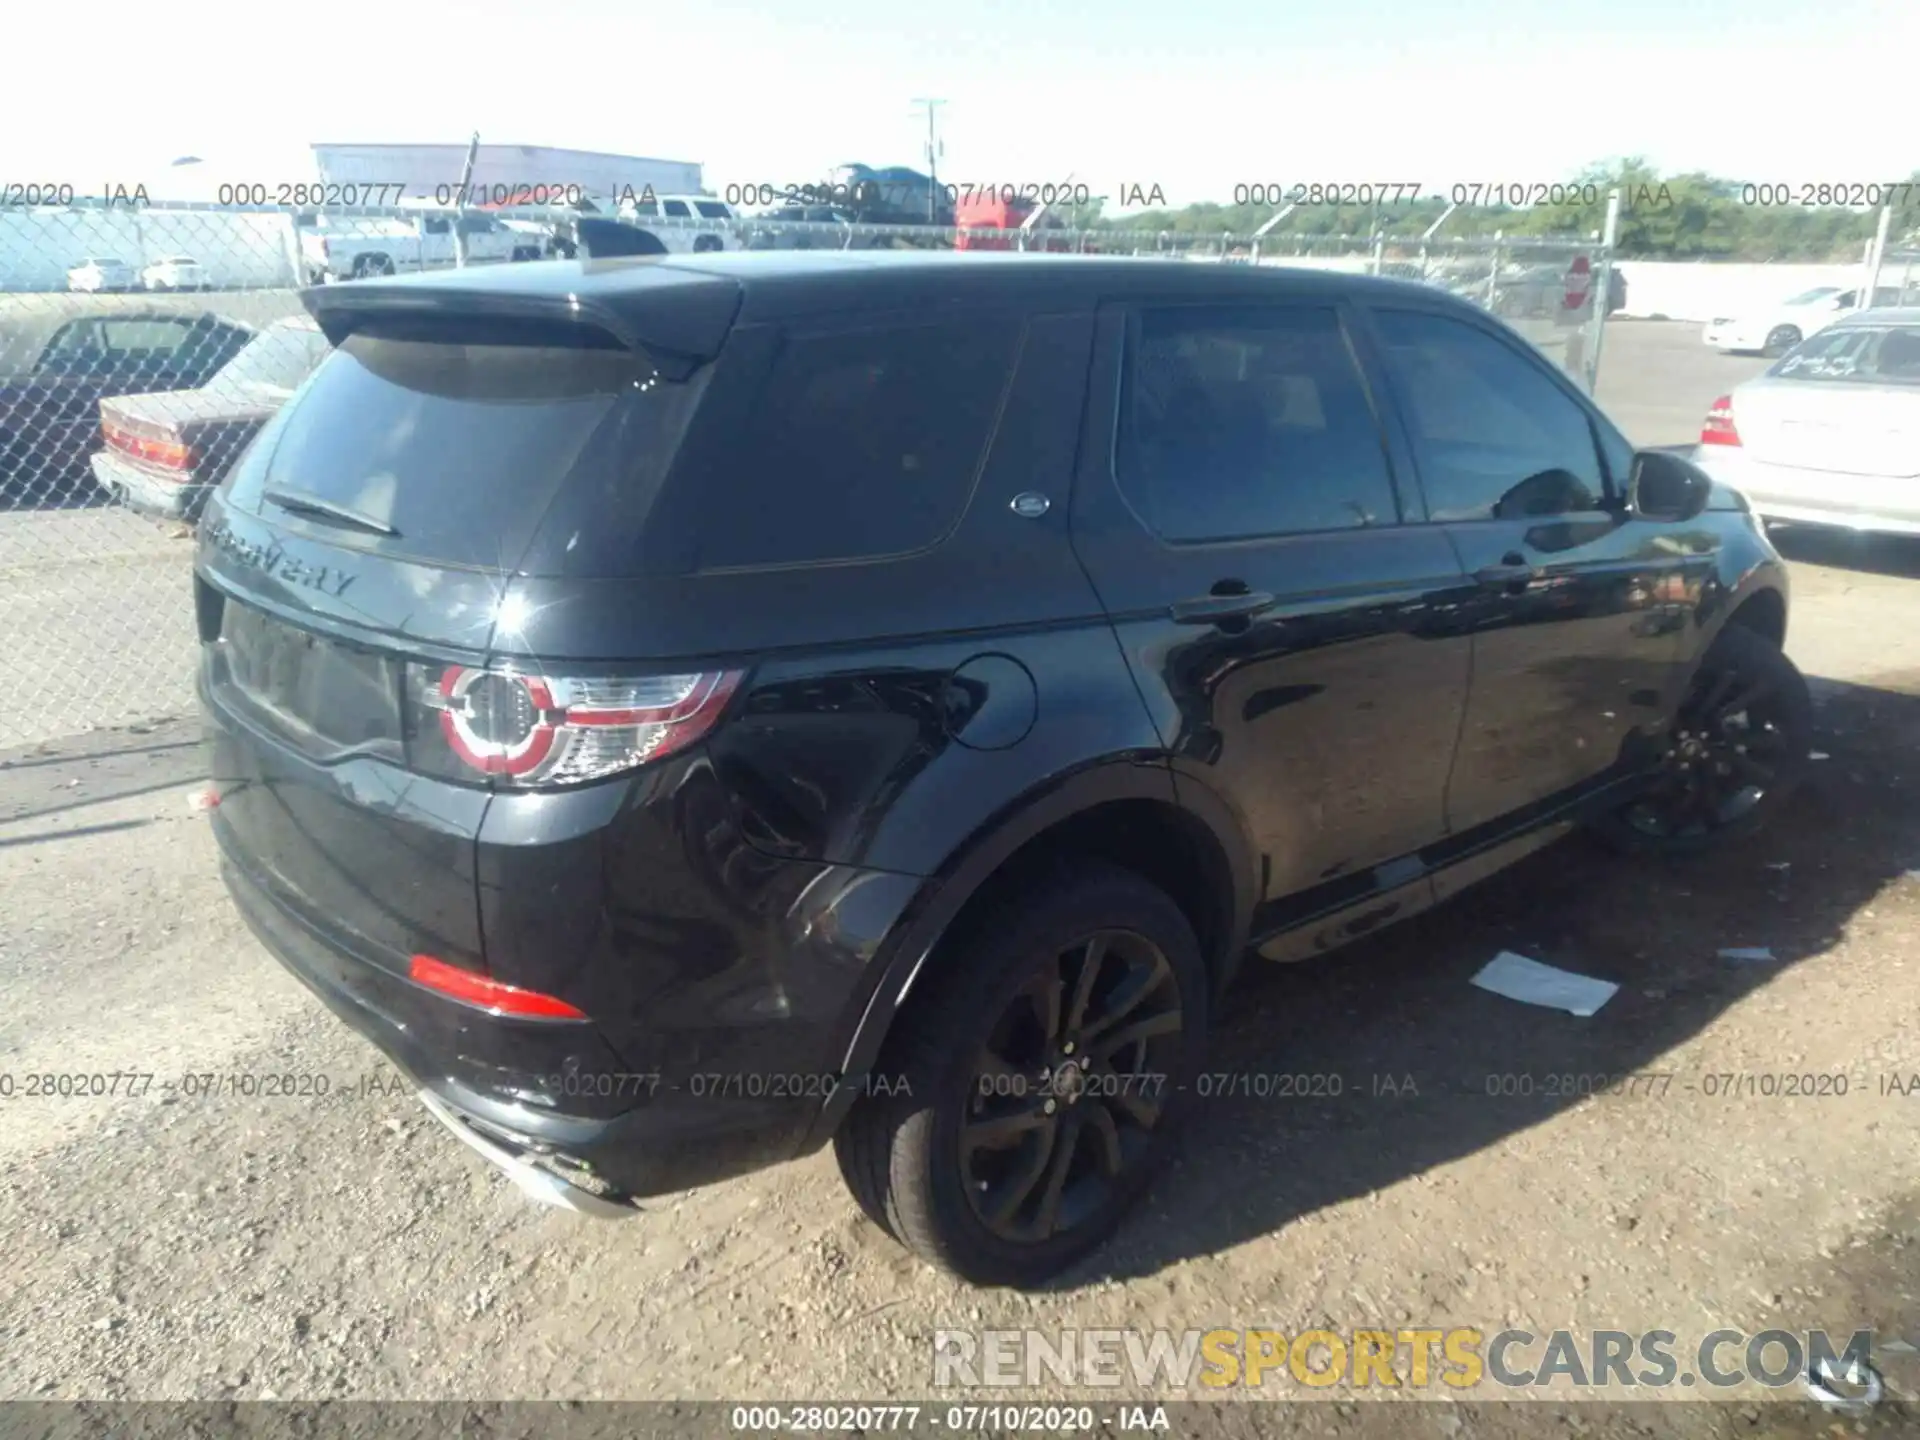 4 Photograph of a damaged car SALCR2GX7KH789617 LAND ROVER DISCOVERY SPORT 2019